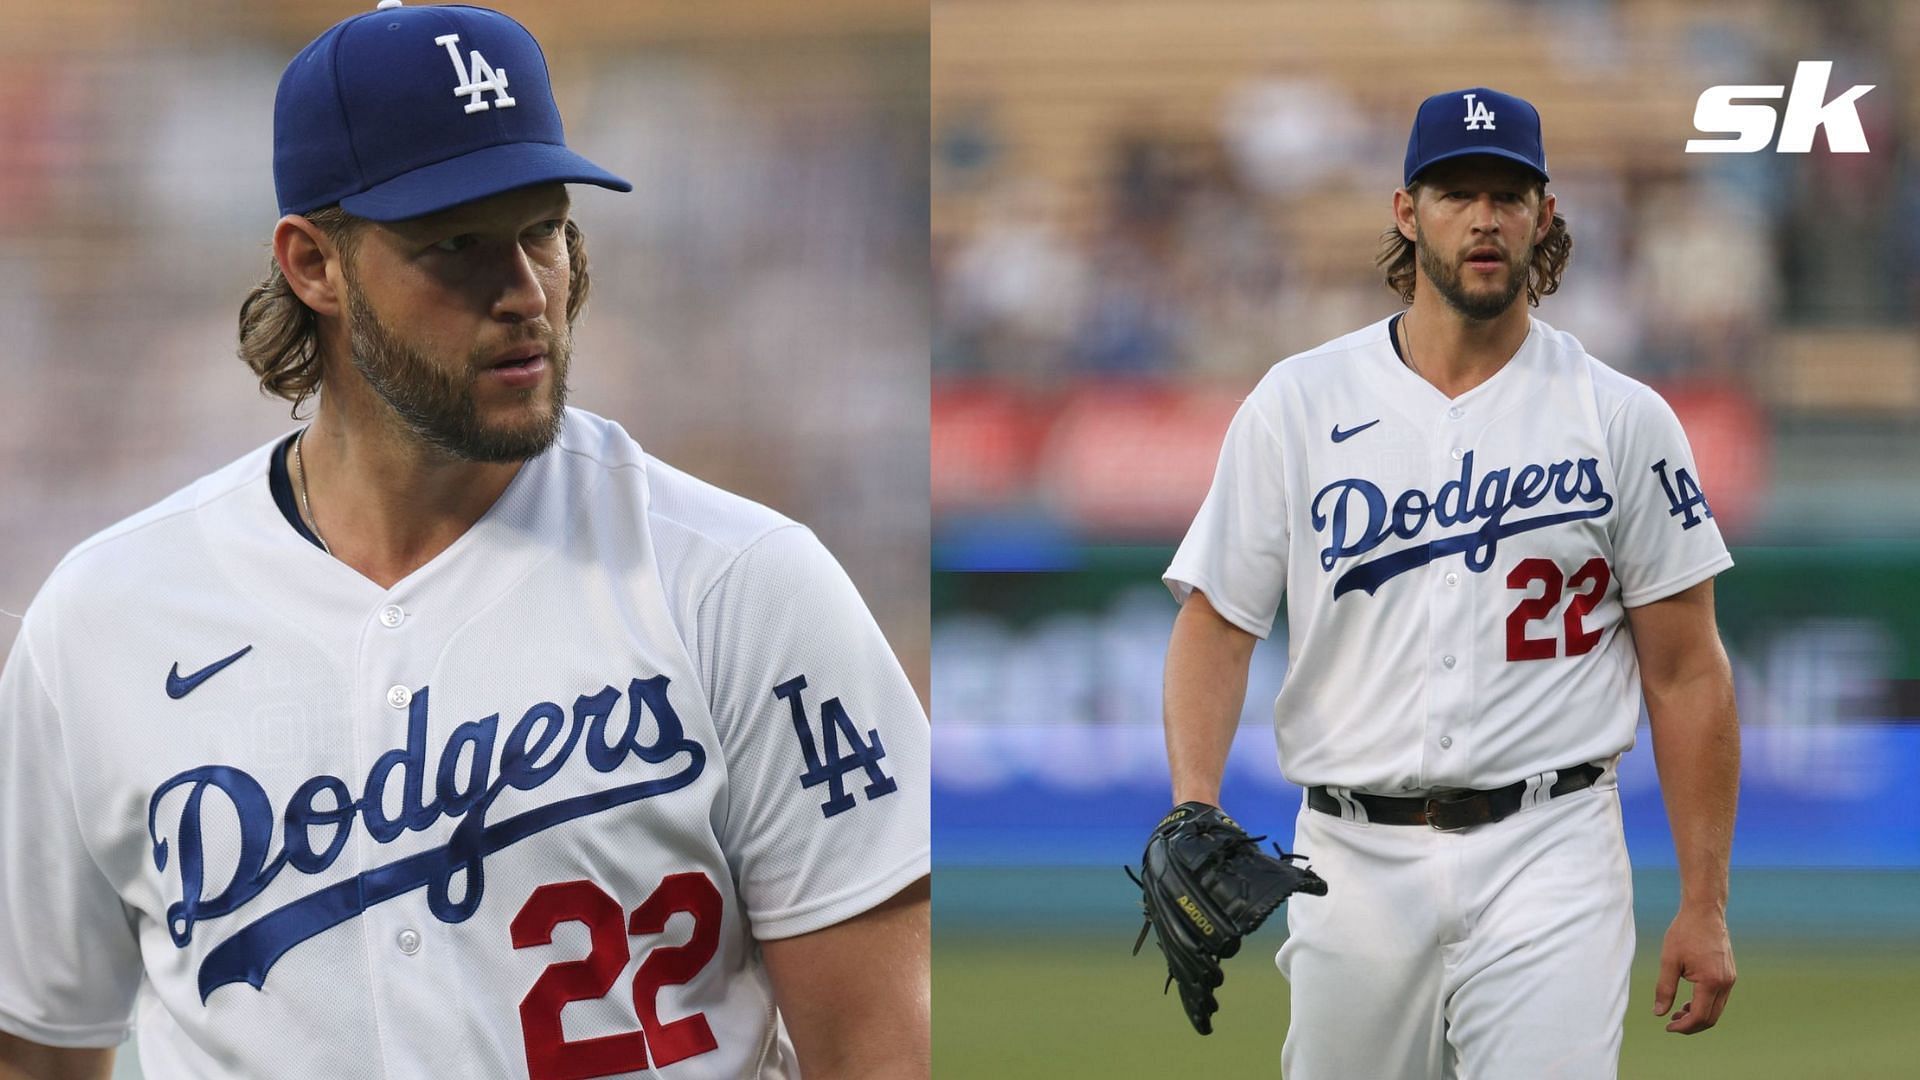 The Los Angeles Dodgers are reportedly open to a reunion with Clayton Kershaw